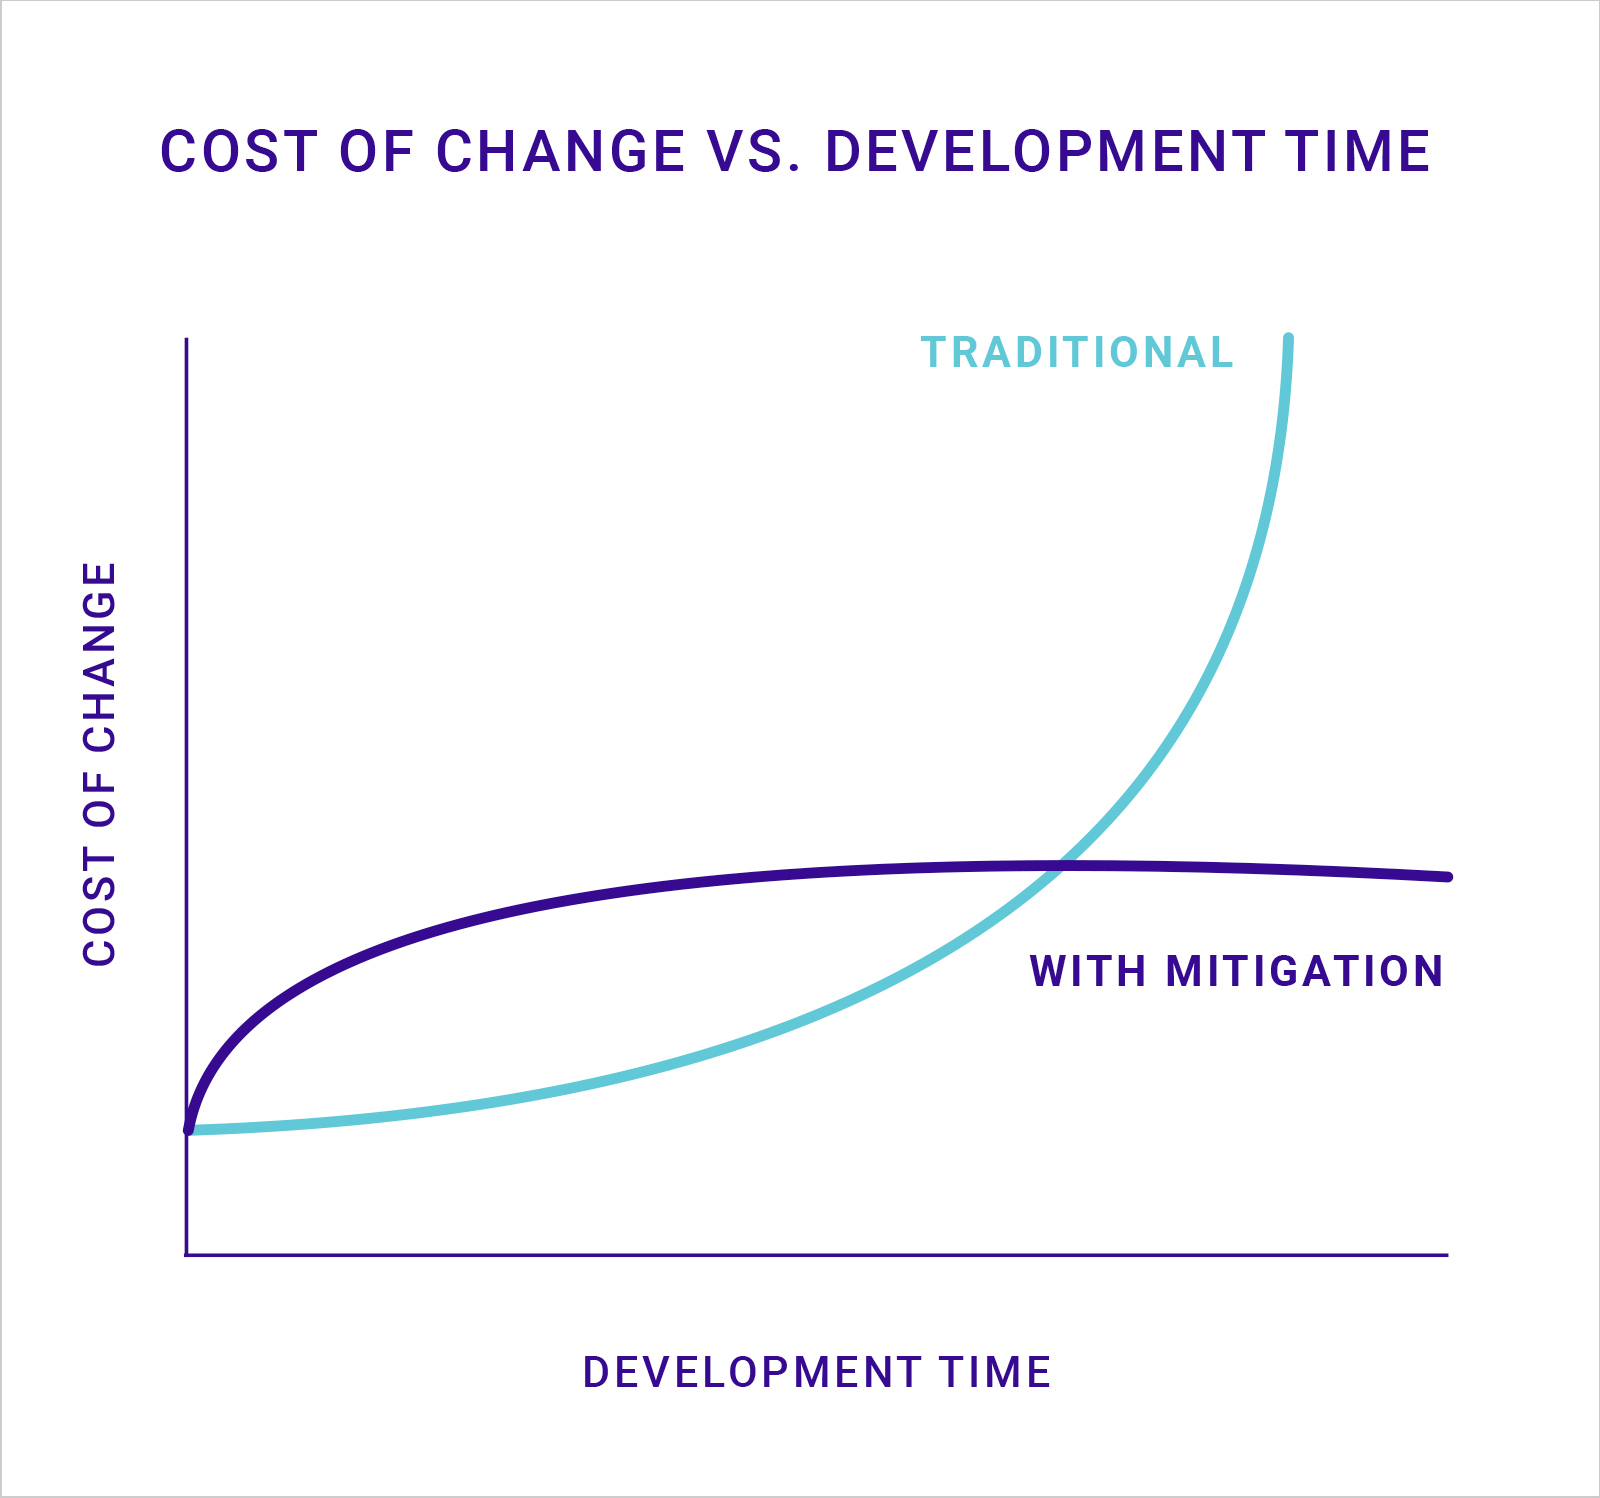 Cost of Change - Development Time